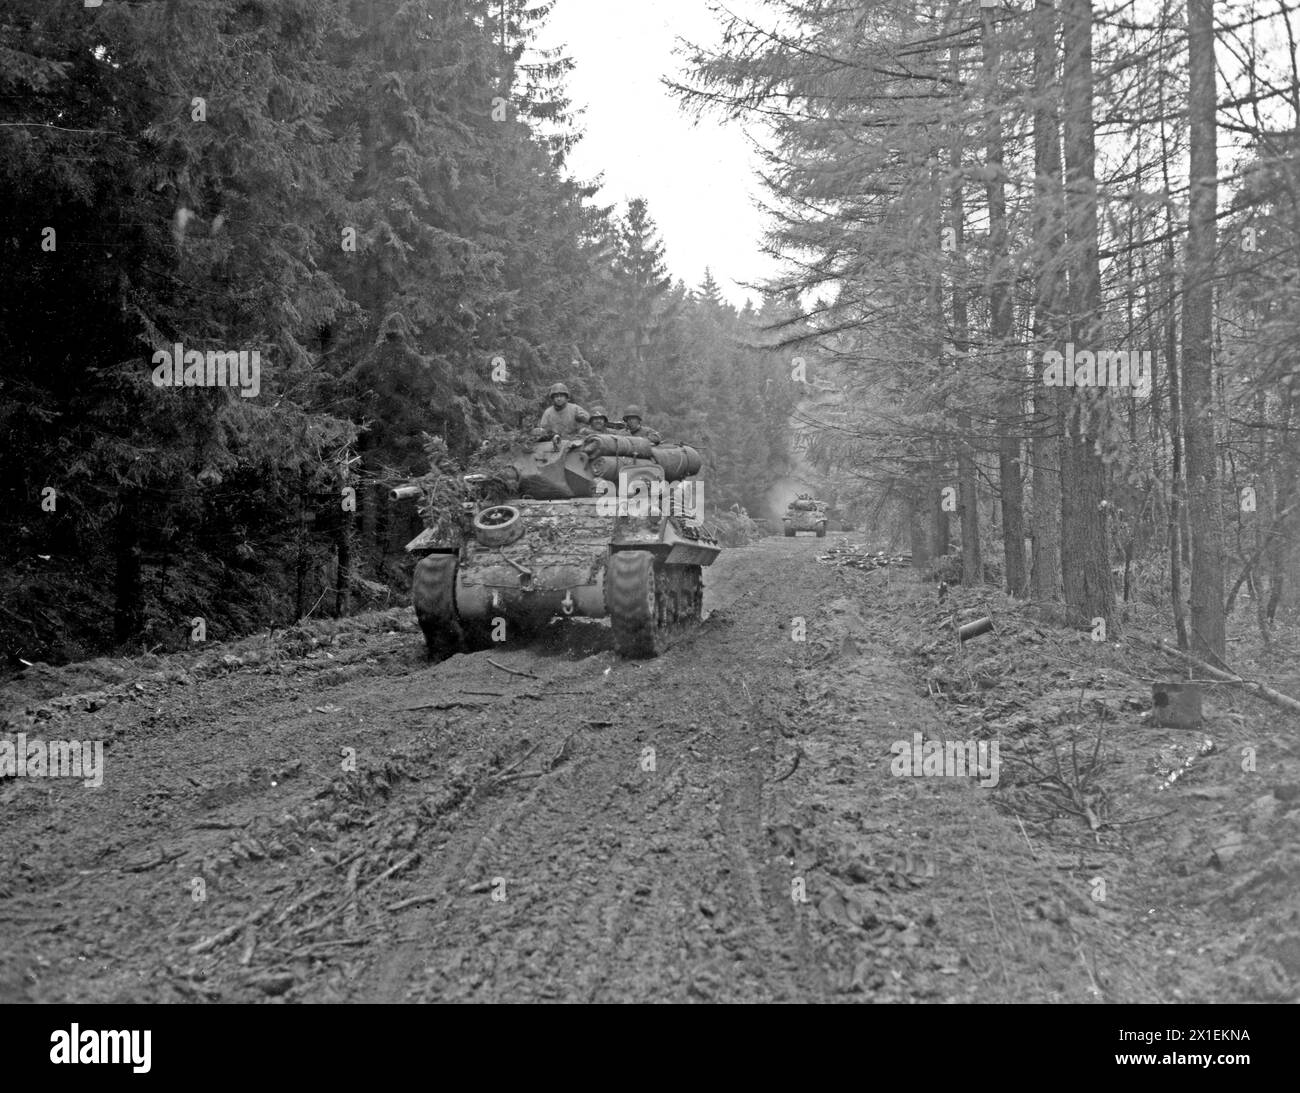 Original Caption: M-10 tank destroyers move up through Hurtgen Forest, on their way to Schmidt, Germany, to encounter a German tank unit occupying that town. 11/4/44. -893rd TD Battalion. Stock Photo